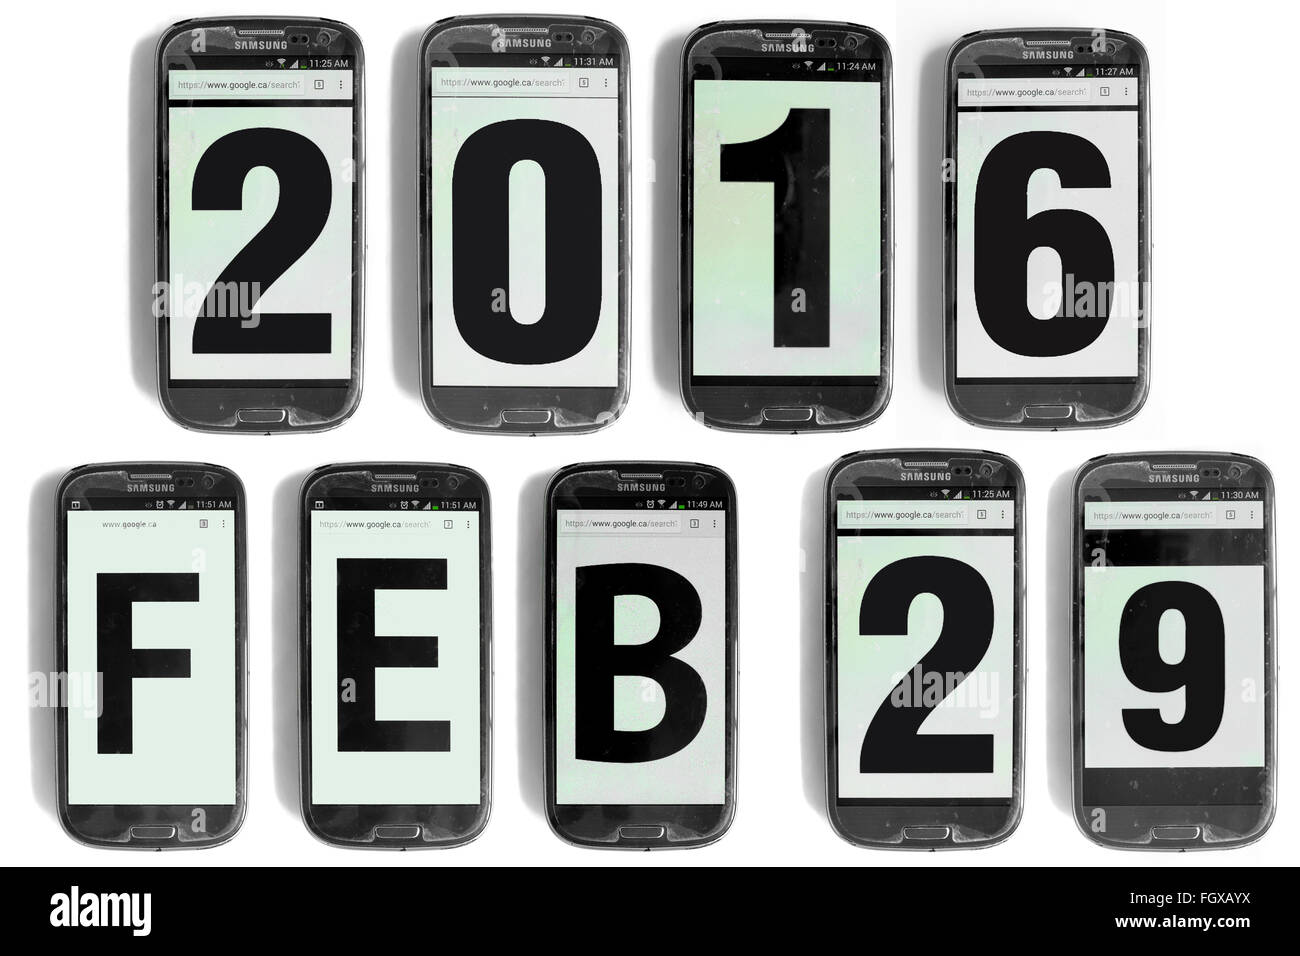 2016 Feb 29 written on the screens of smartphones photographed against a white background. Stock Photo